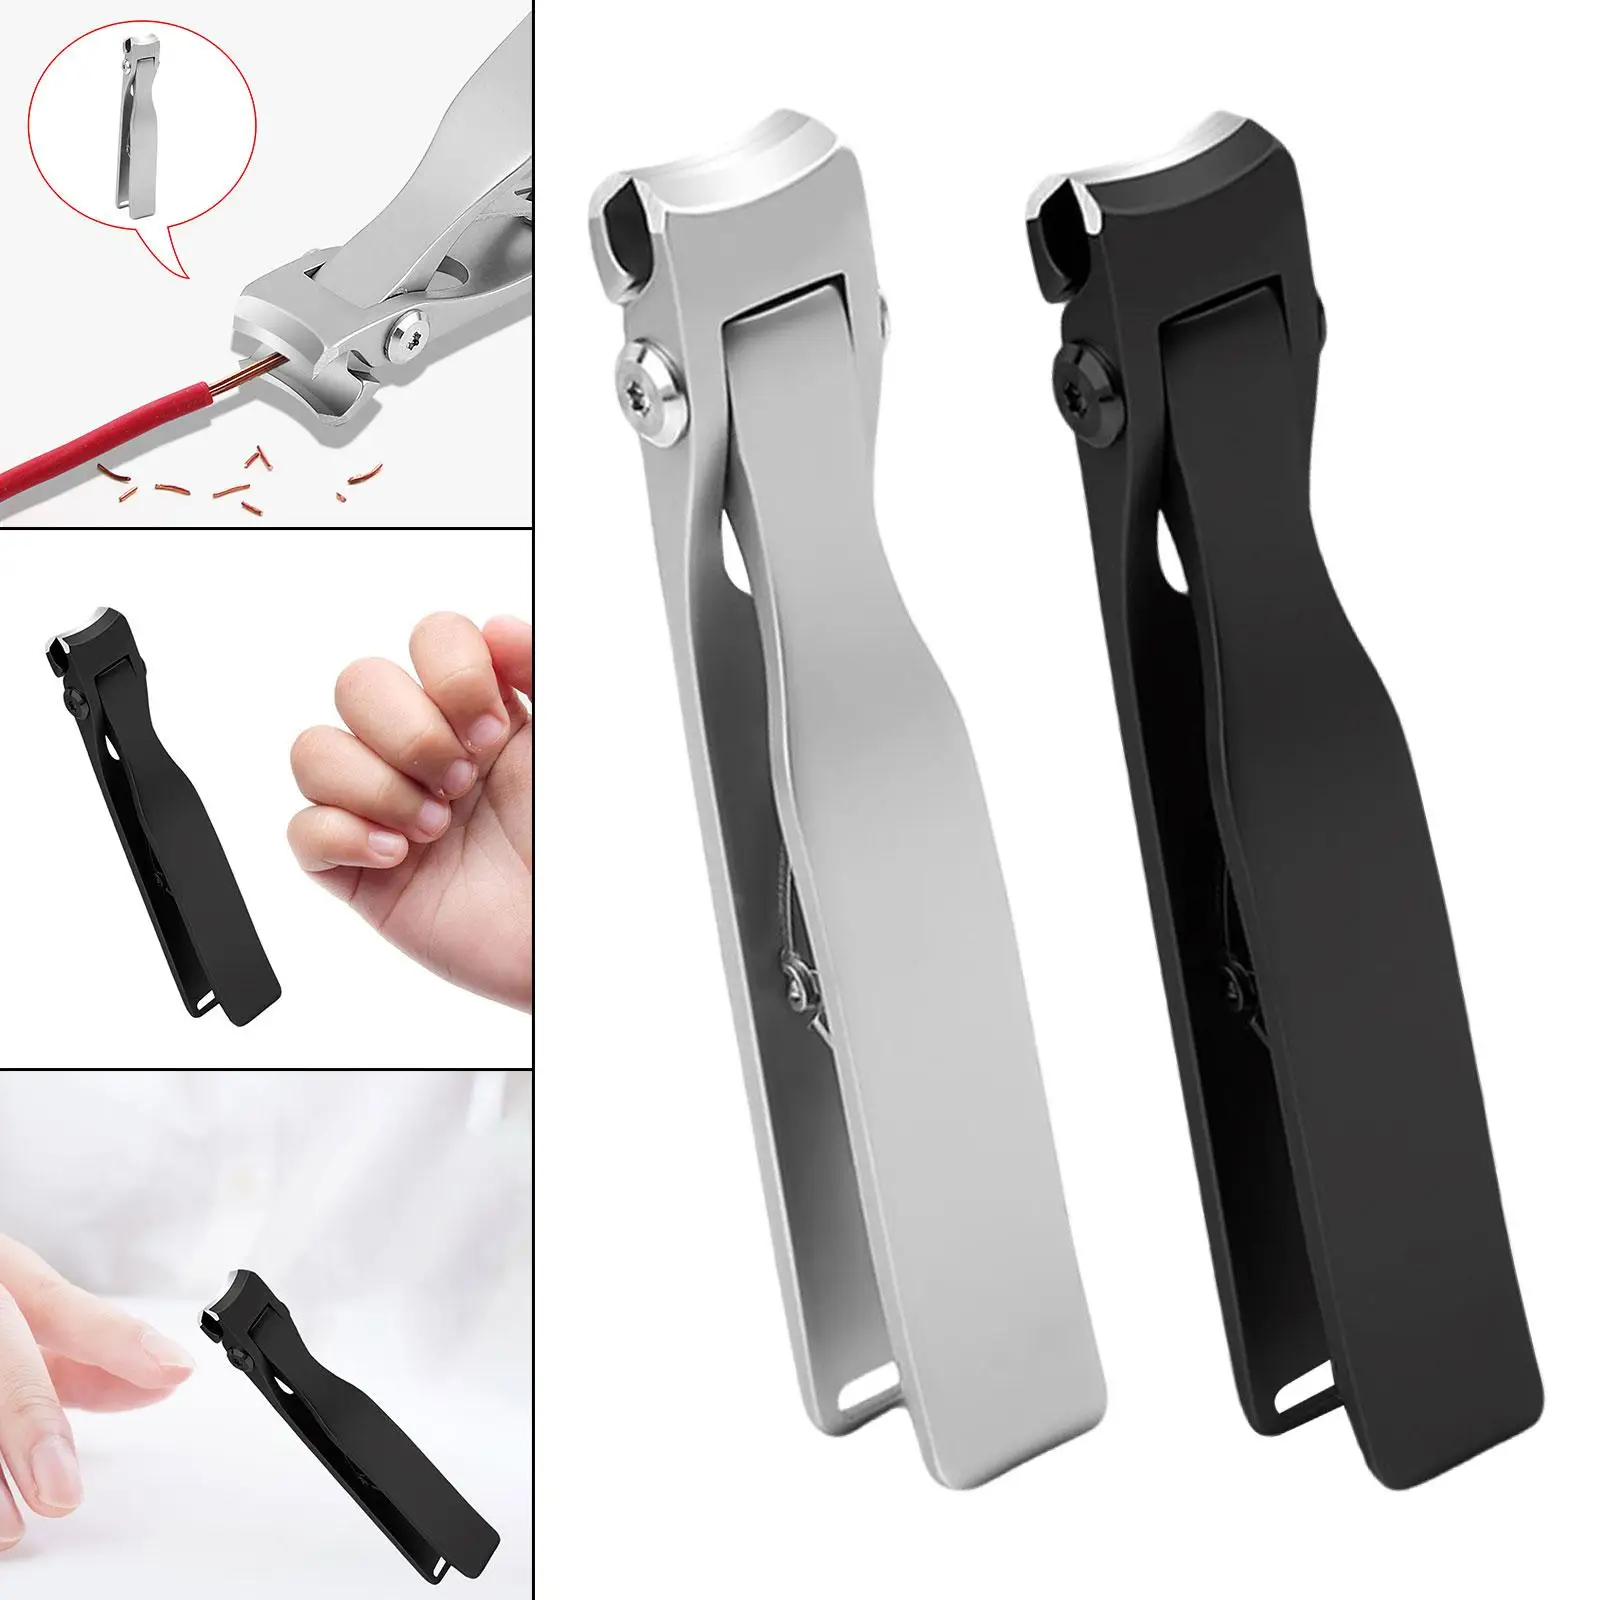 Toe Nail Clippers Nail Trimmer Anti Slip Comfort Grip Long Handle Durable Sharp Fingernail & Toenail Clippers for Thick Nails